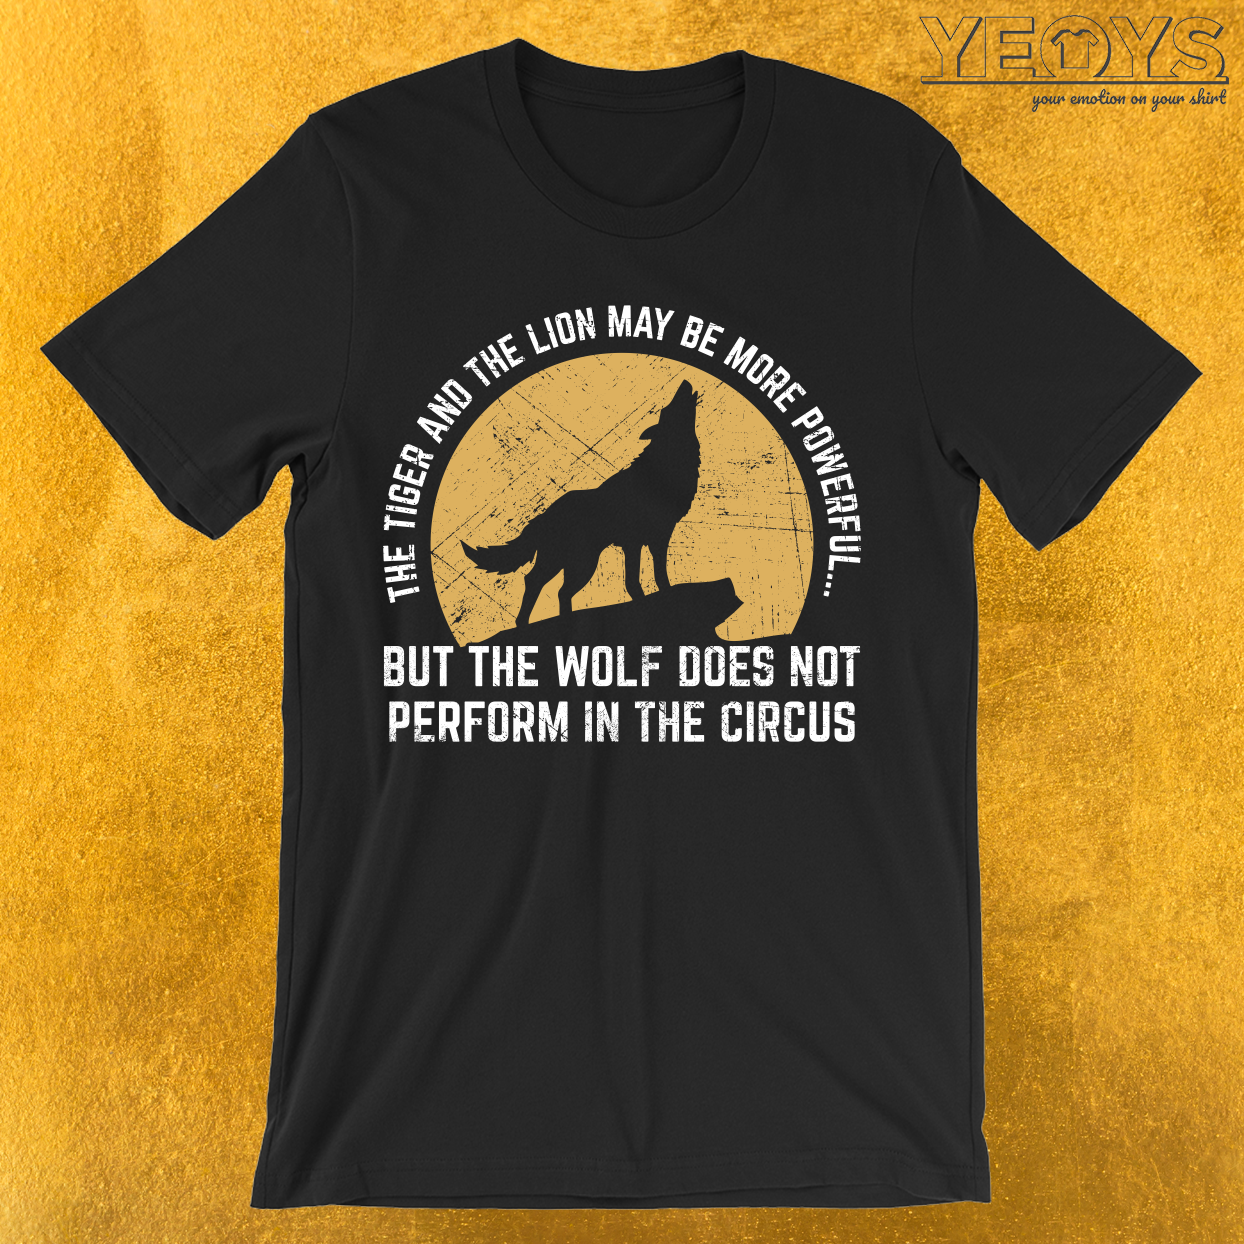 The Wolf Does Not Perform In The Circus T-Shirt